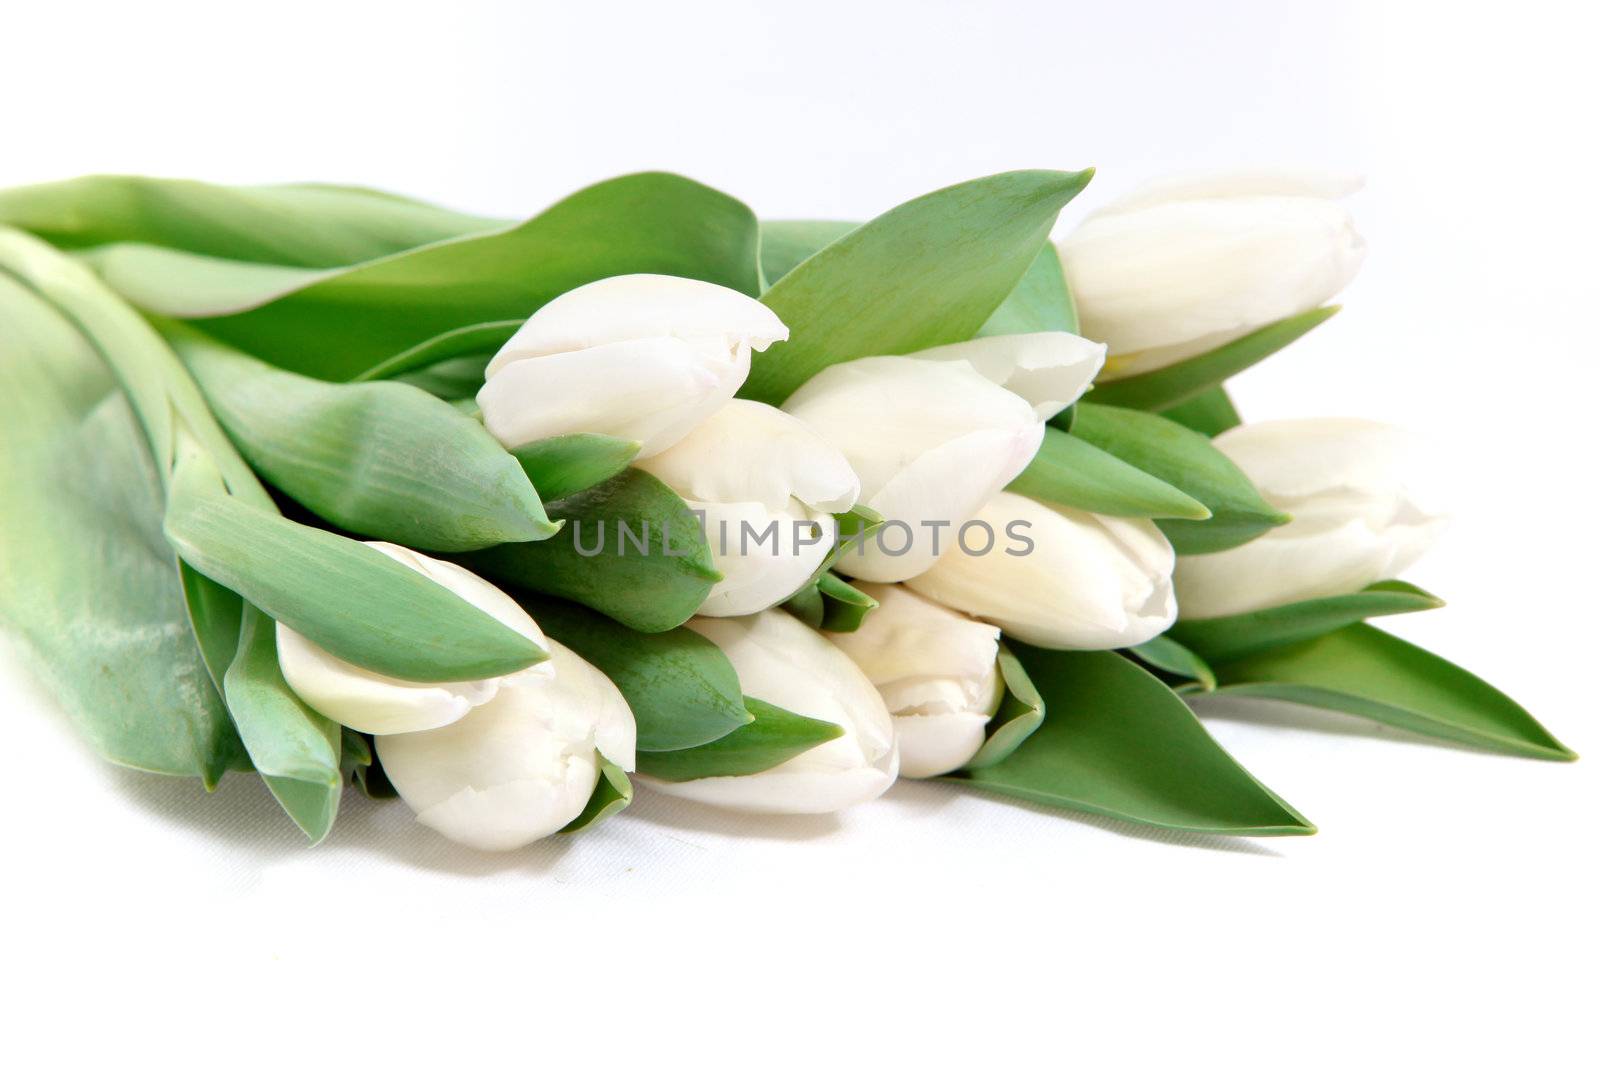 Bunch of beautiful cut fresh white tulips with their leaves lying on a white background with copyspace for your romantic message